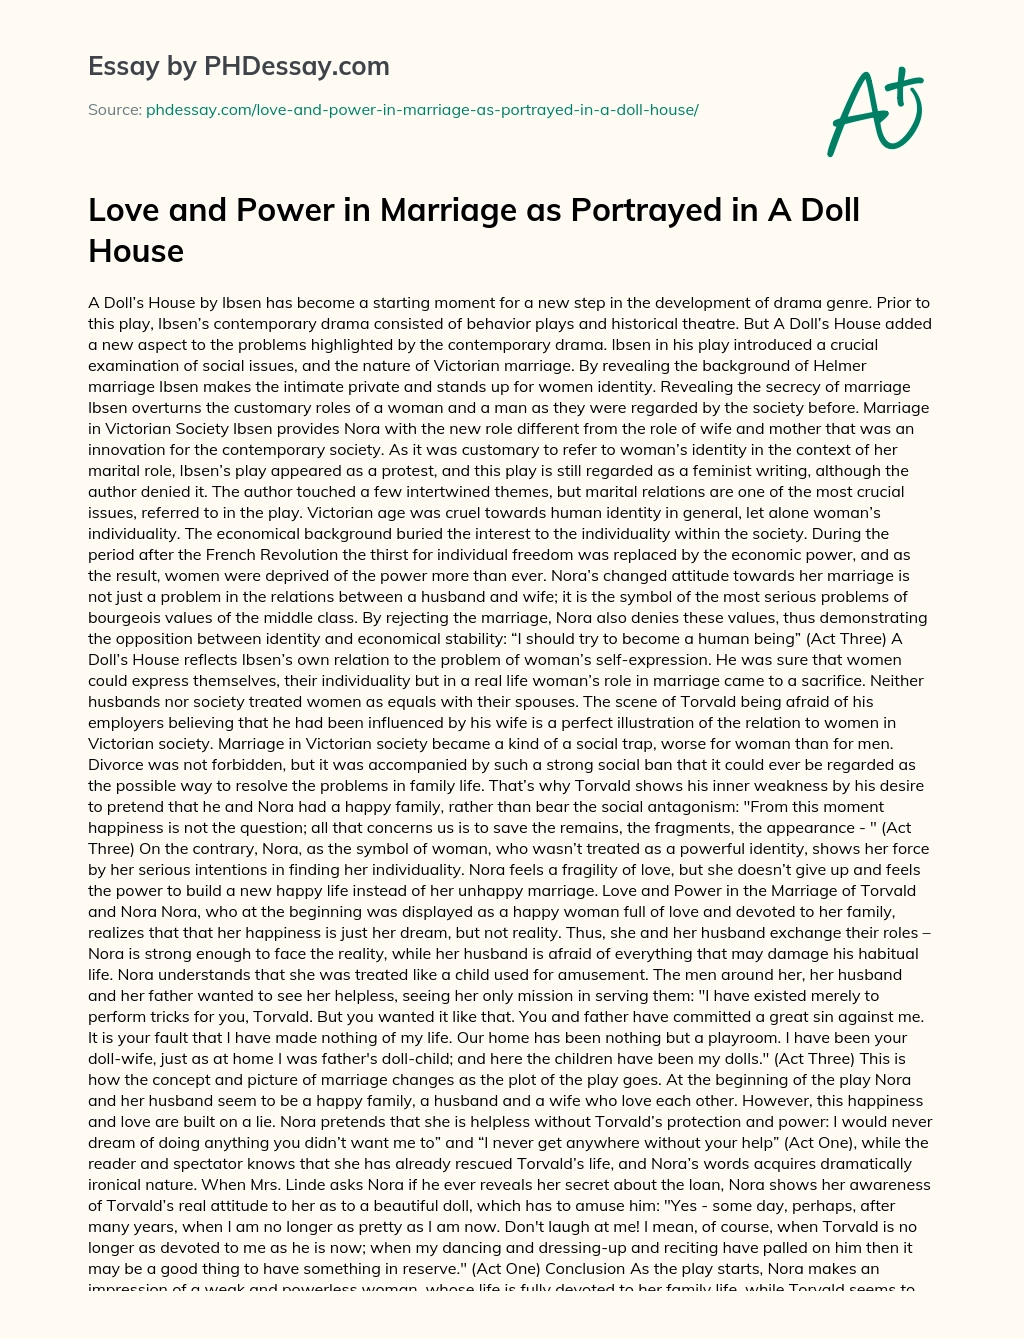 Love and Power in Marriage as Portrayed in A Doll House essay